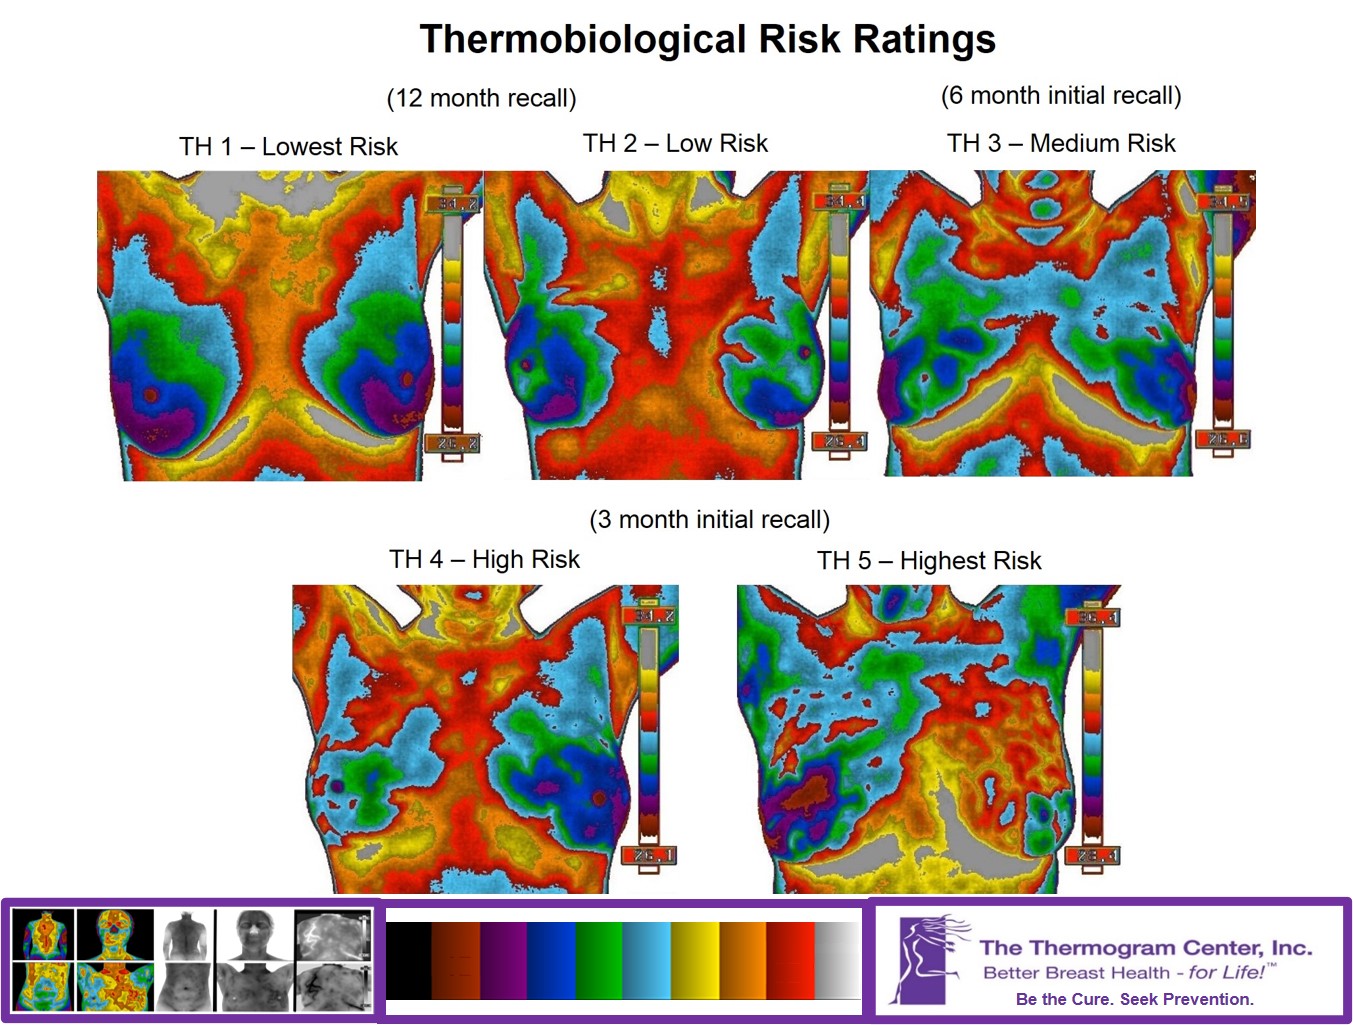 Thermo Image for breasts